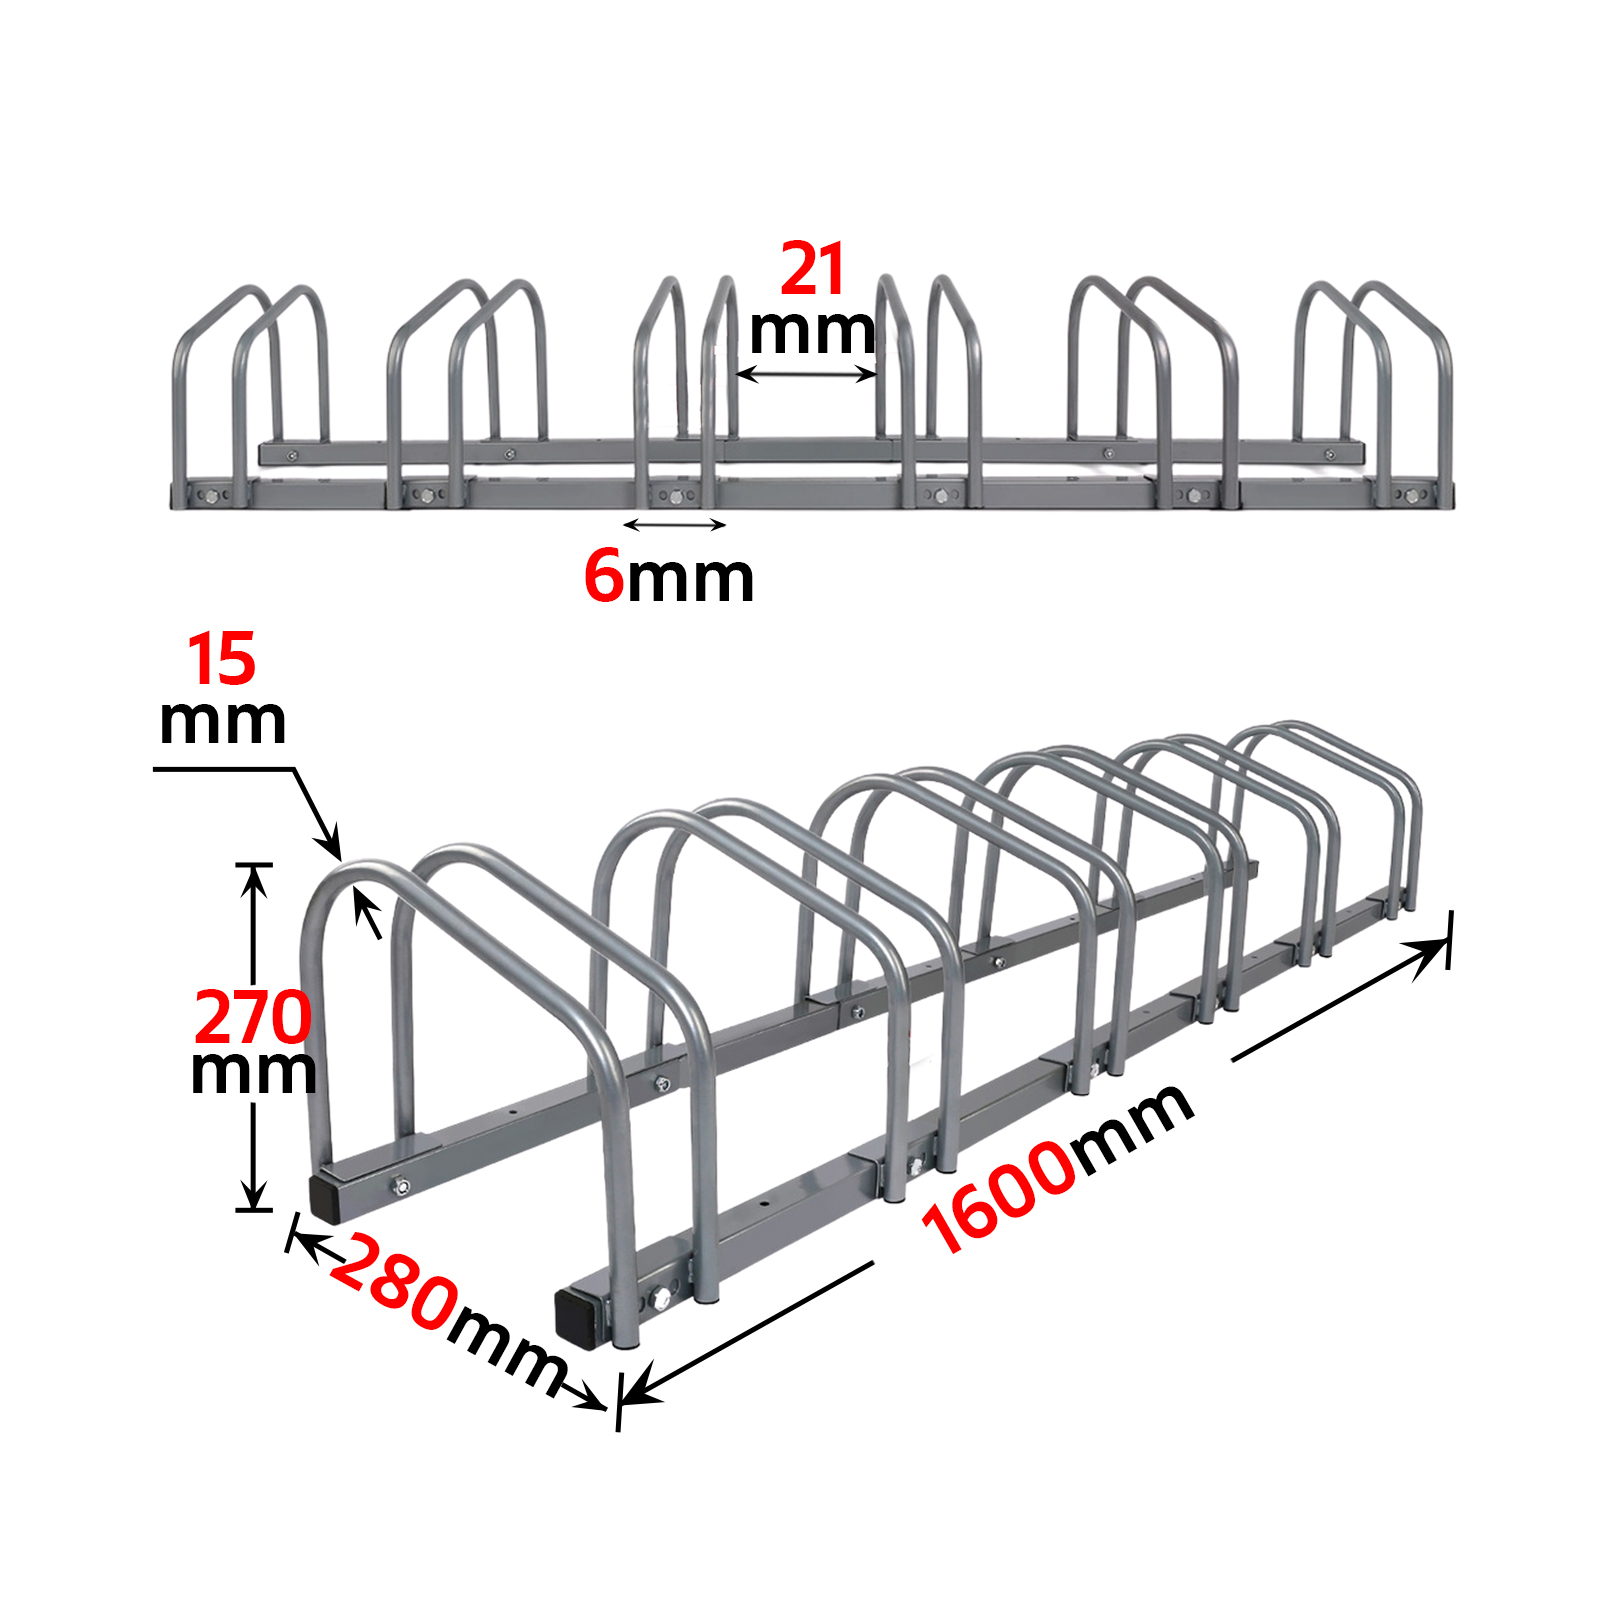 Bike Floor Parking Rack Instant Storage Stand Bicycle Cycling Portable Silver